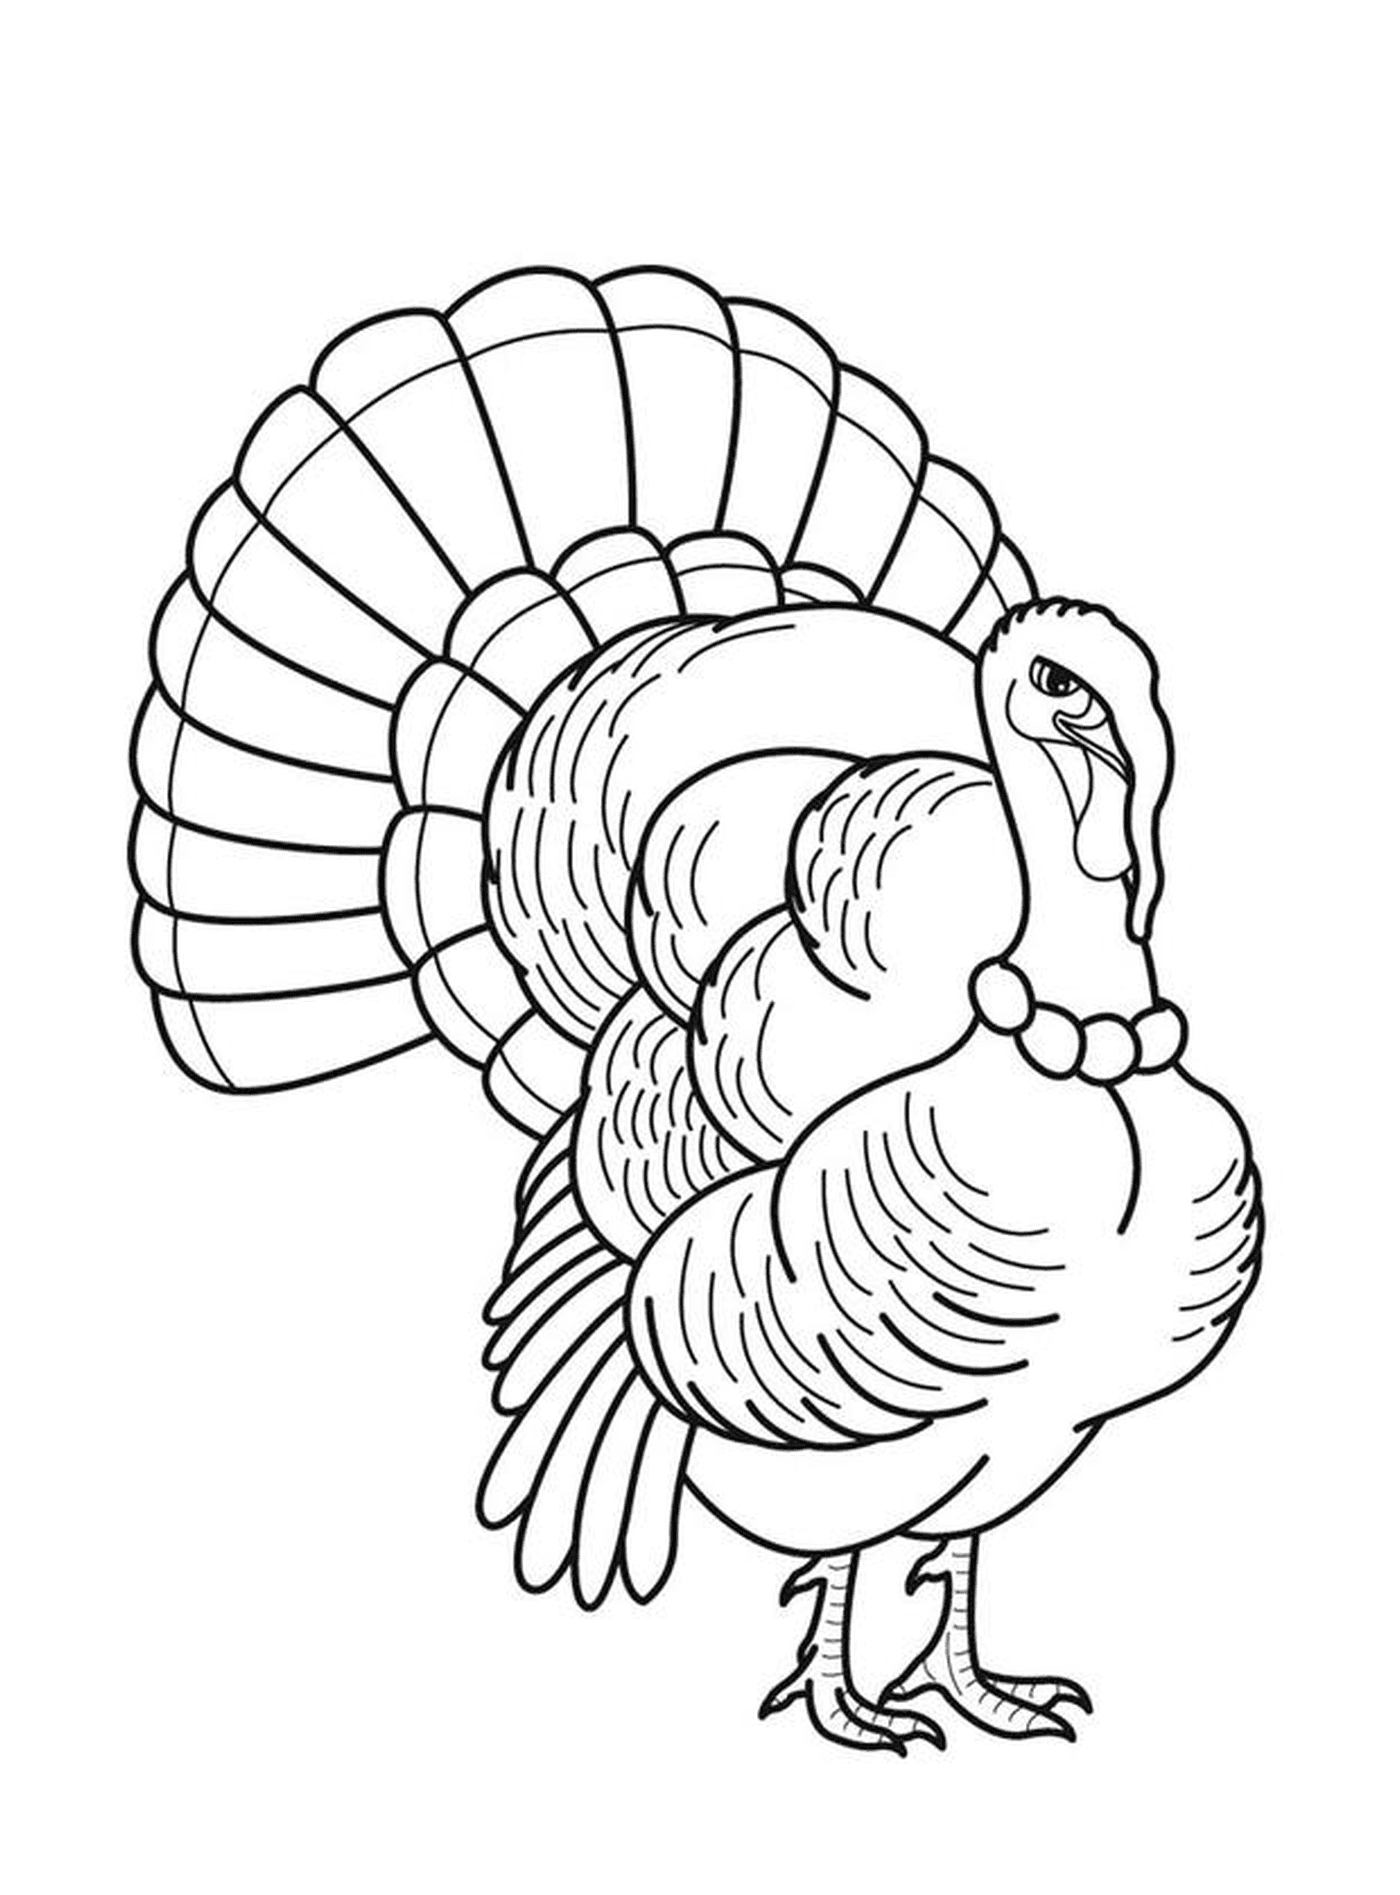  A turkey in black and white 